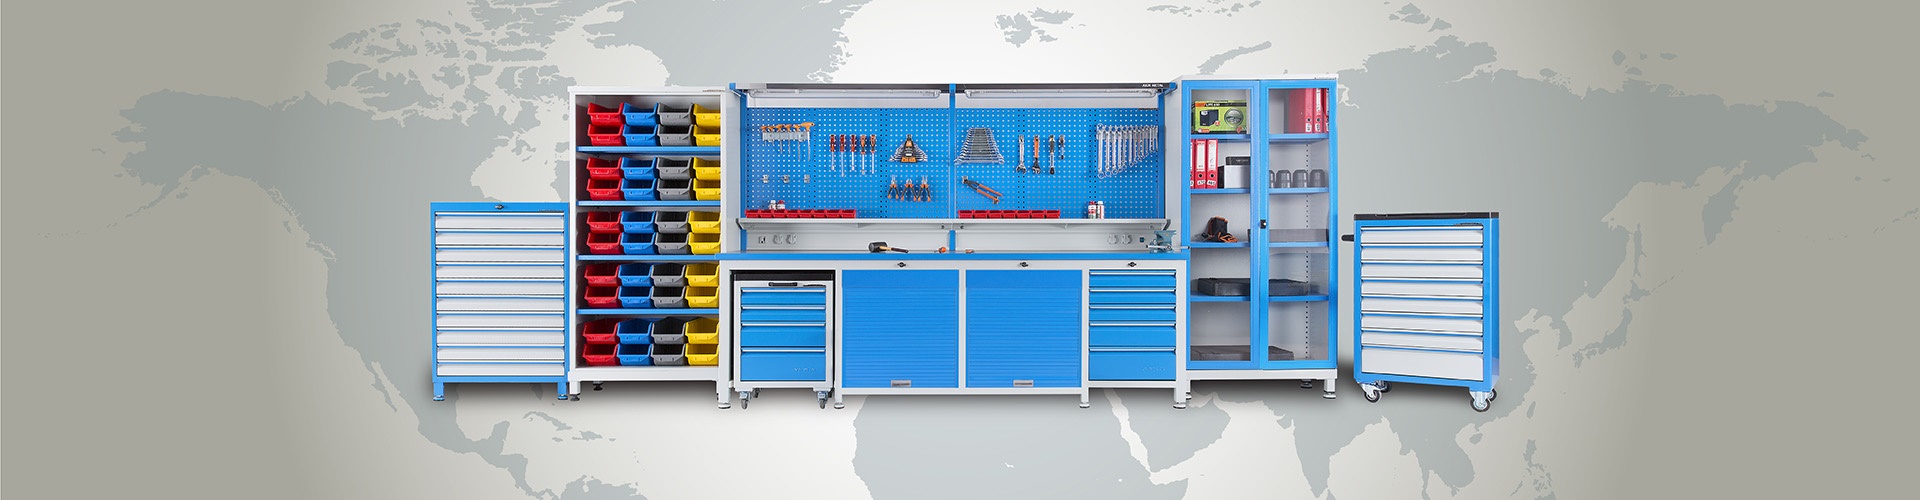 Indutrial Equipments by Metin AKIN Metal ; Workbenches, Trolleys, Cabinets, Drawer Cabinets, Lockers and other...